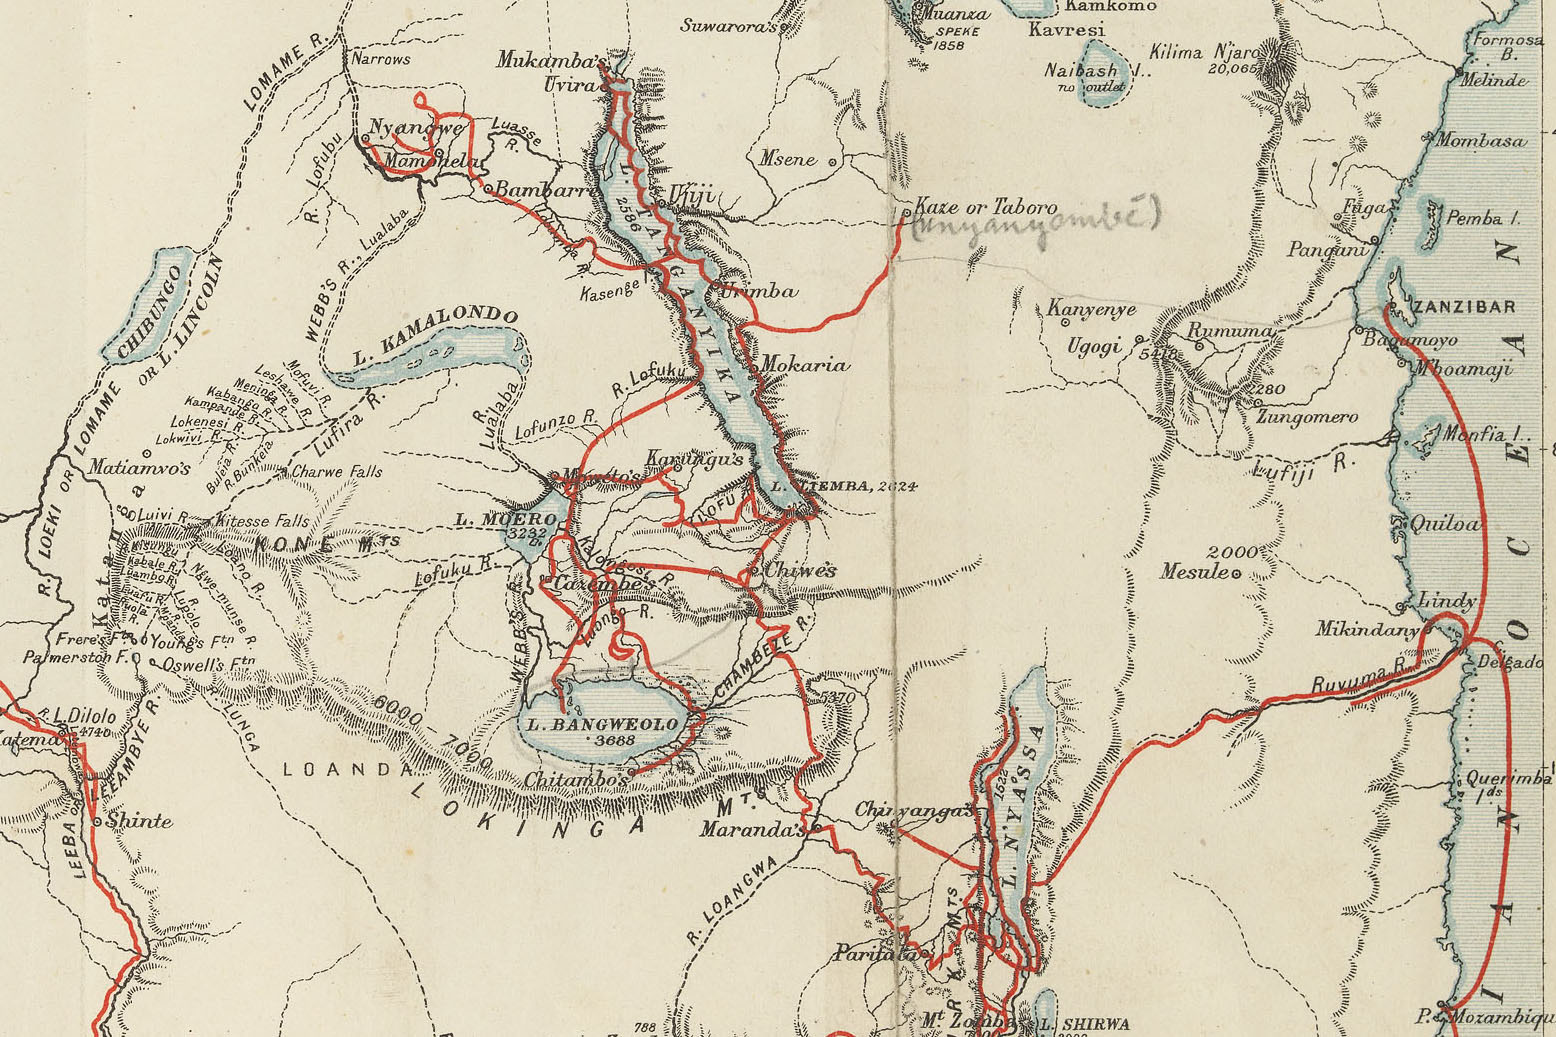 Small map from the Last Journals (Livingstone 1874). Copyright National Library of Scotland. Creative Commons Share-alike 2.5 UK: Scotland (https://creativecommons.org/licenses/by-nc-sa/2.5/scotland/).